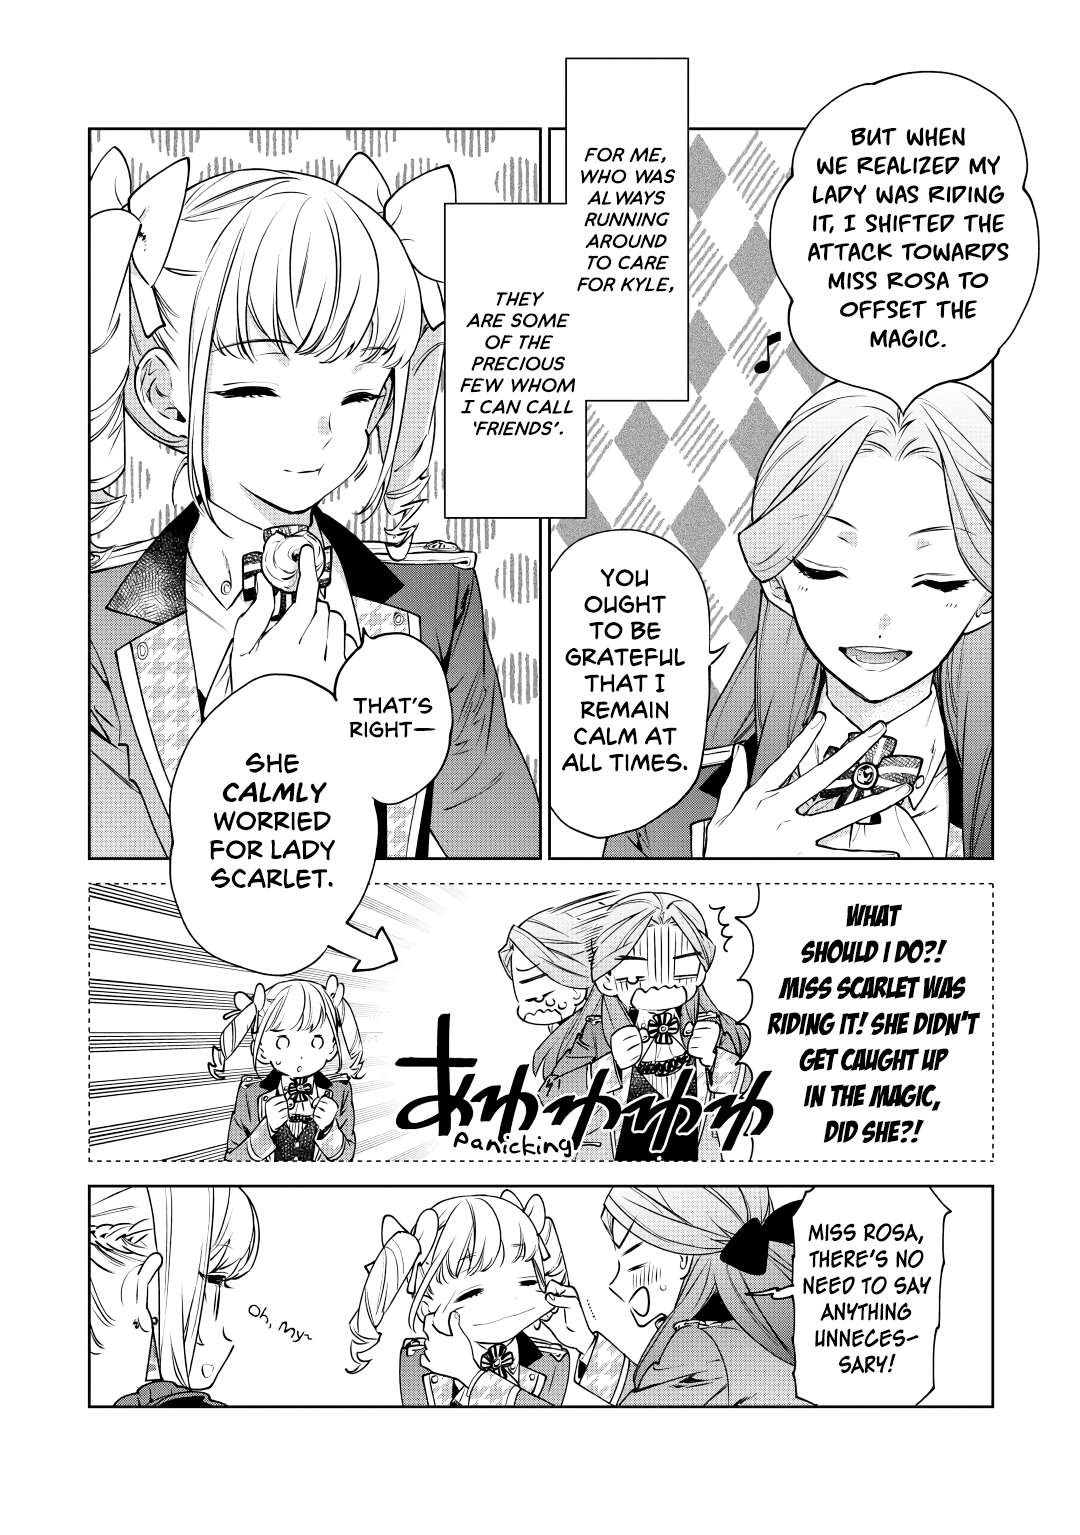 May I Ask For One Final Thing? - Page 2